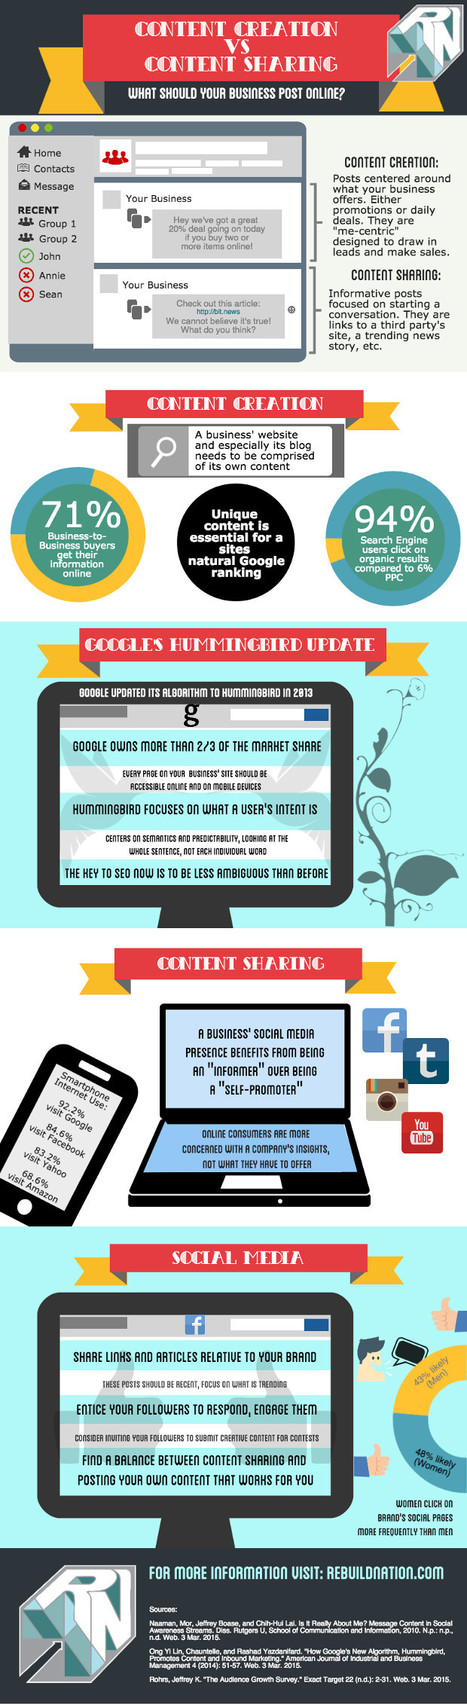 Content Creation vs. Content Sharing #INFOGRAPHIC | MarketingHits | Scoop.it